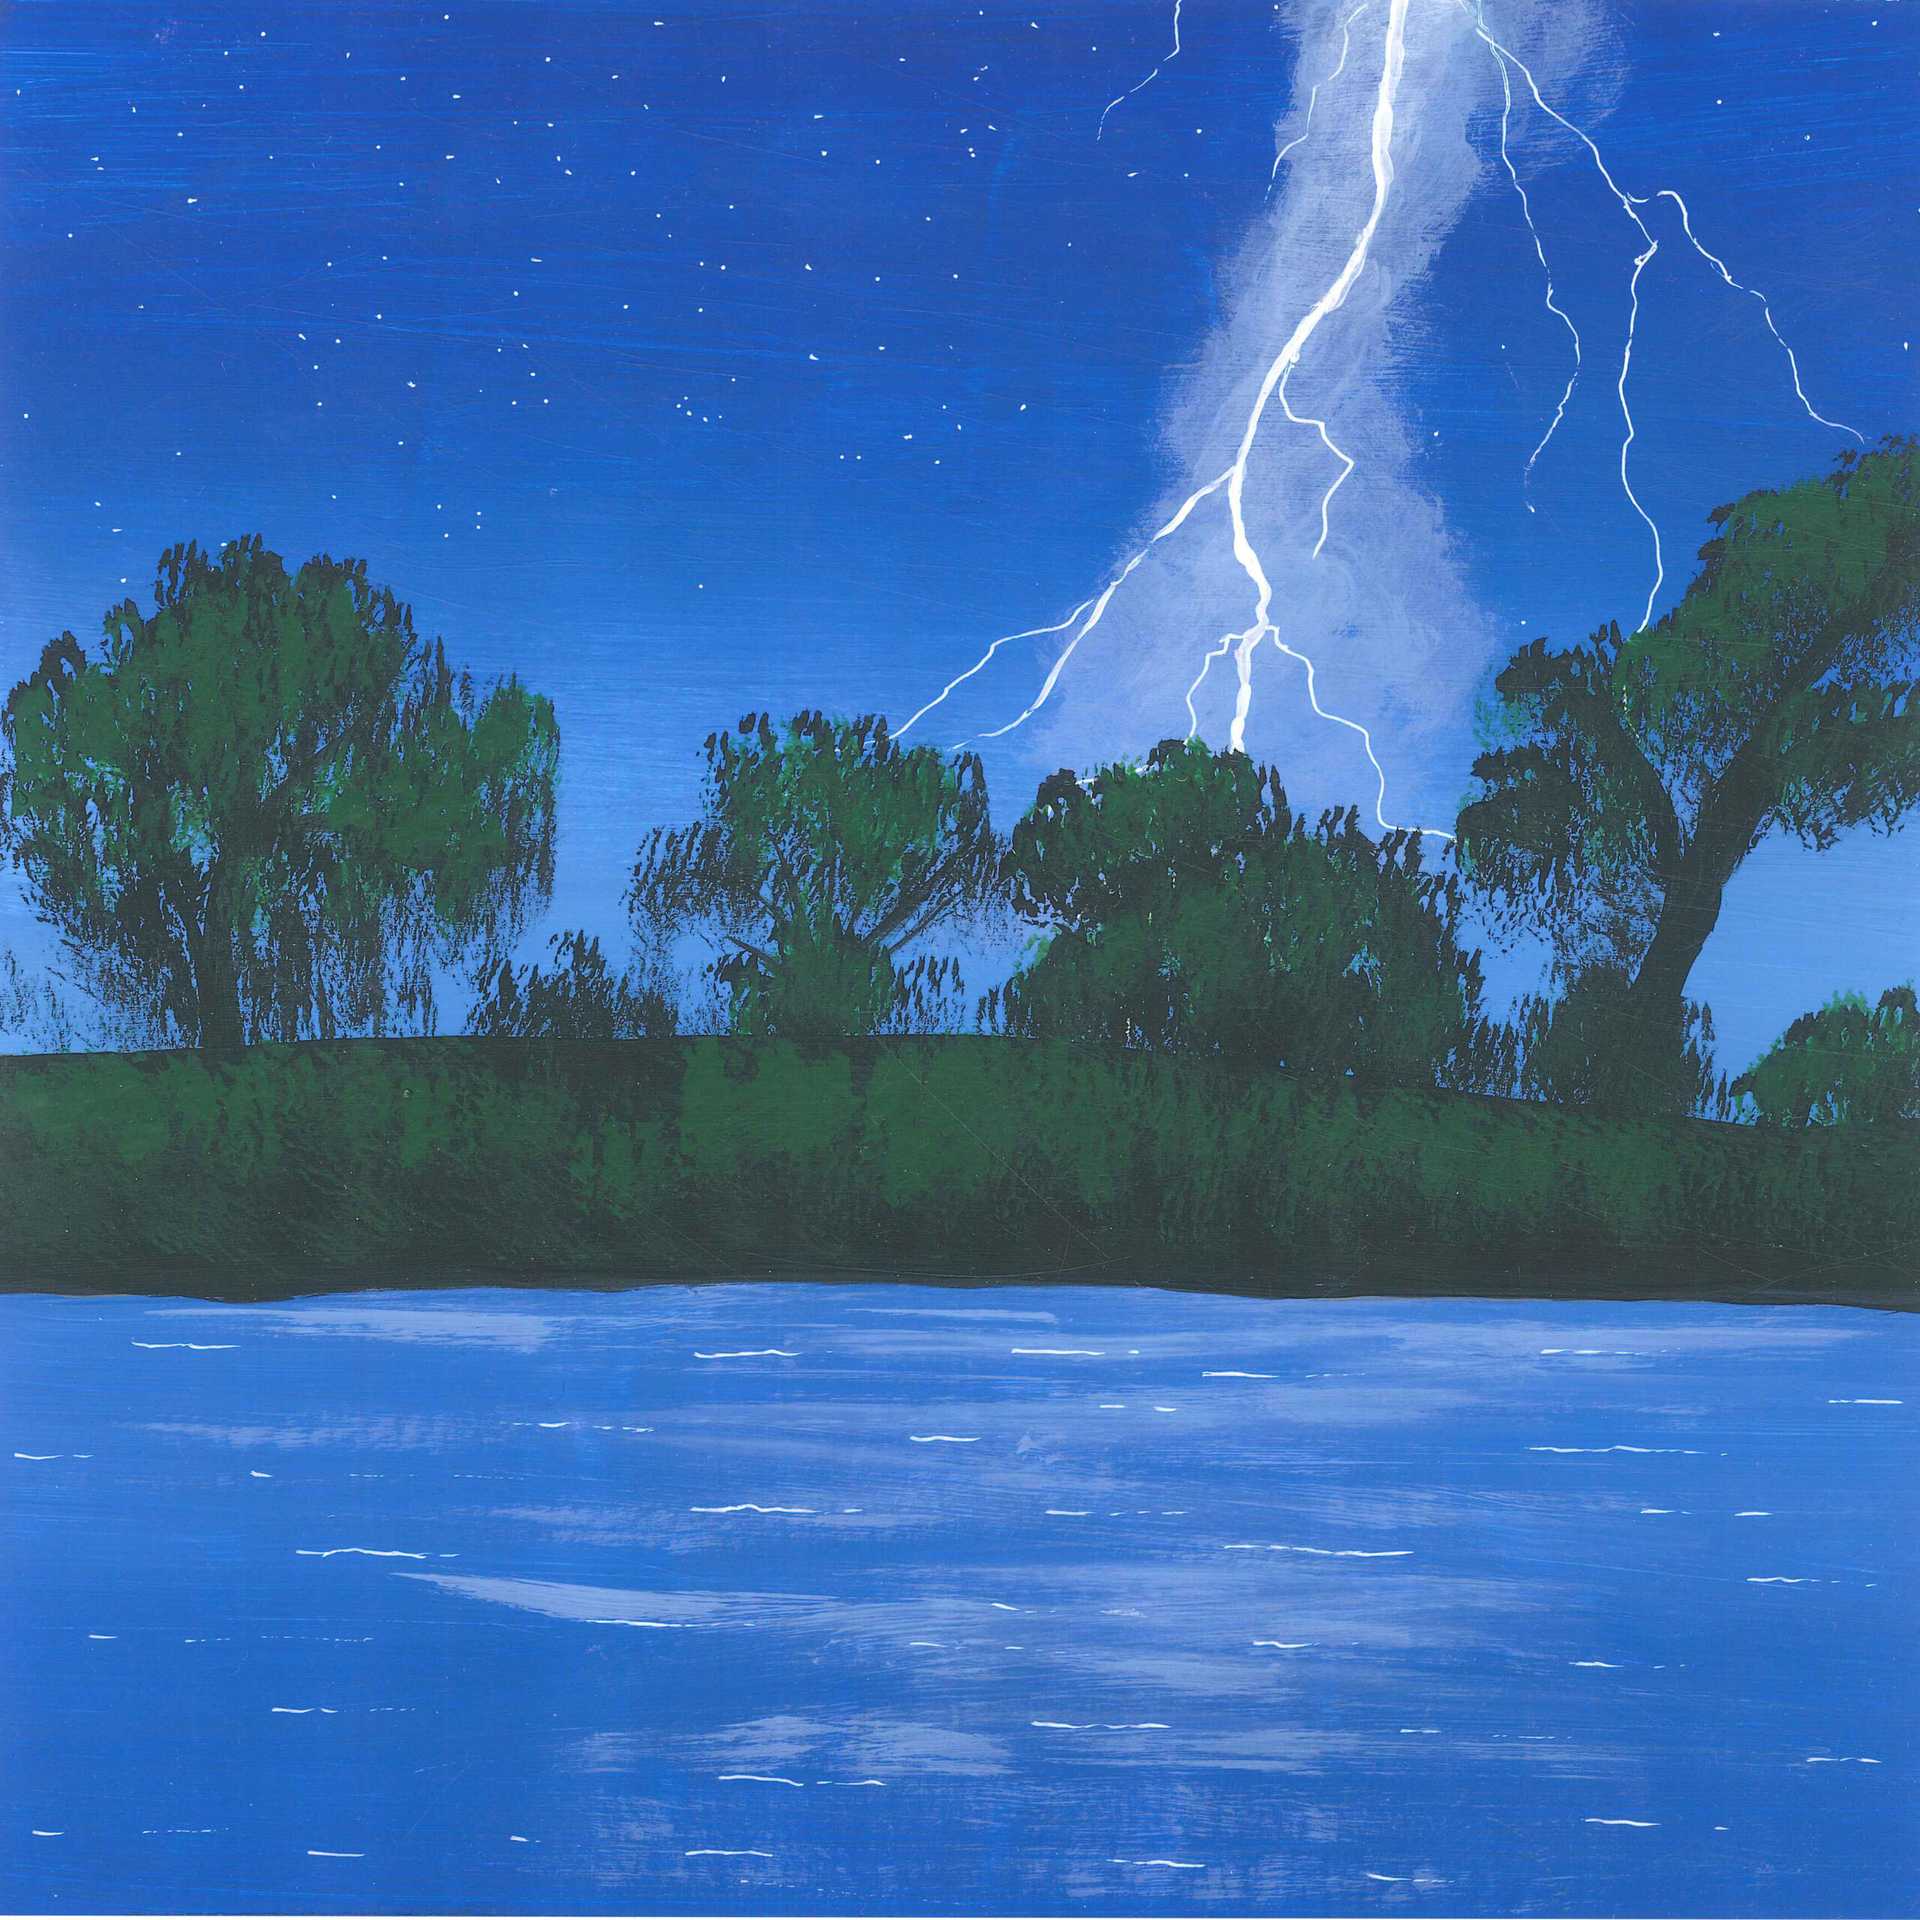 Massive Thunderstorm Approaching in the Amazon Rainforest - nature landscape painting - earth.fm